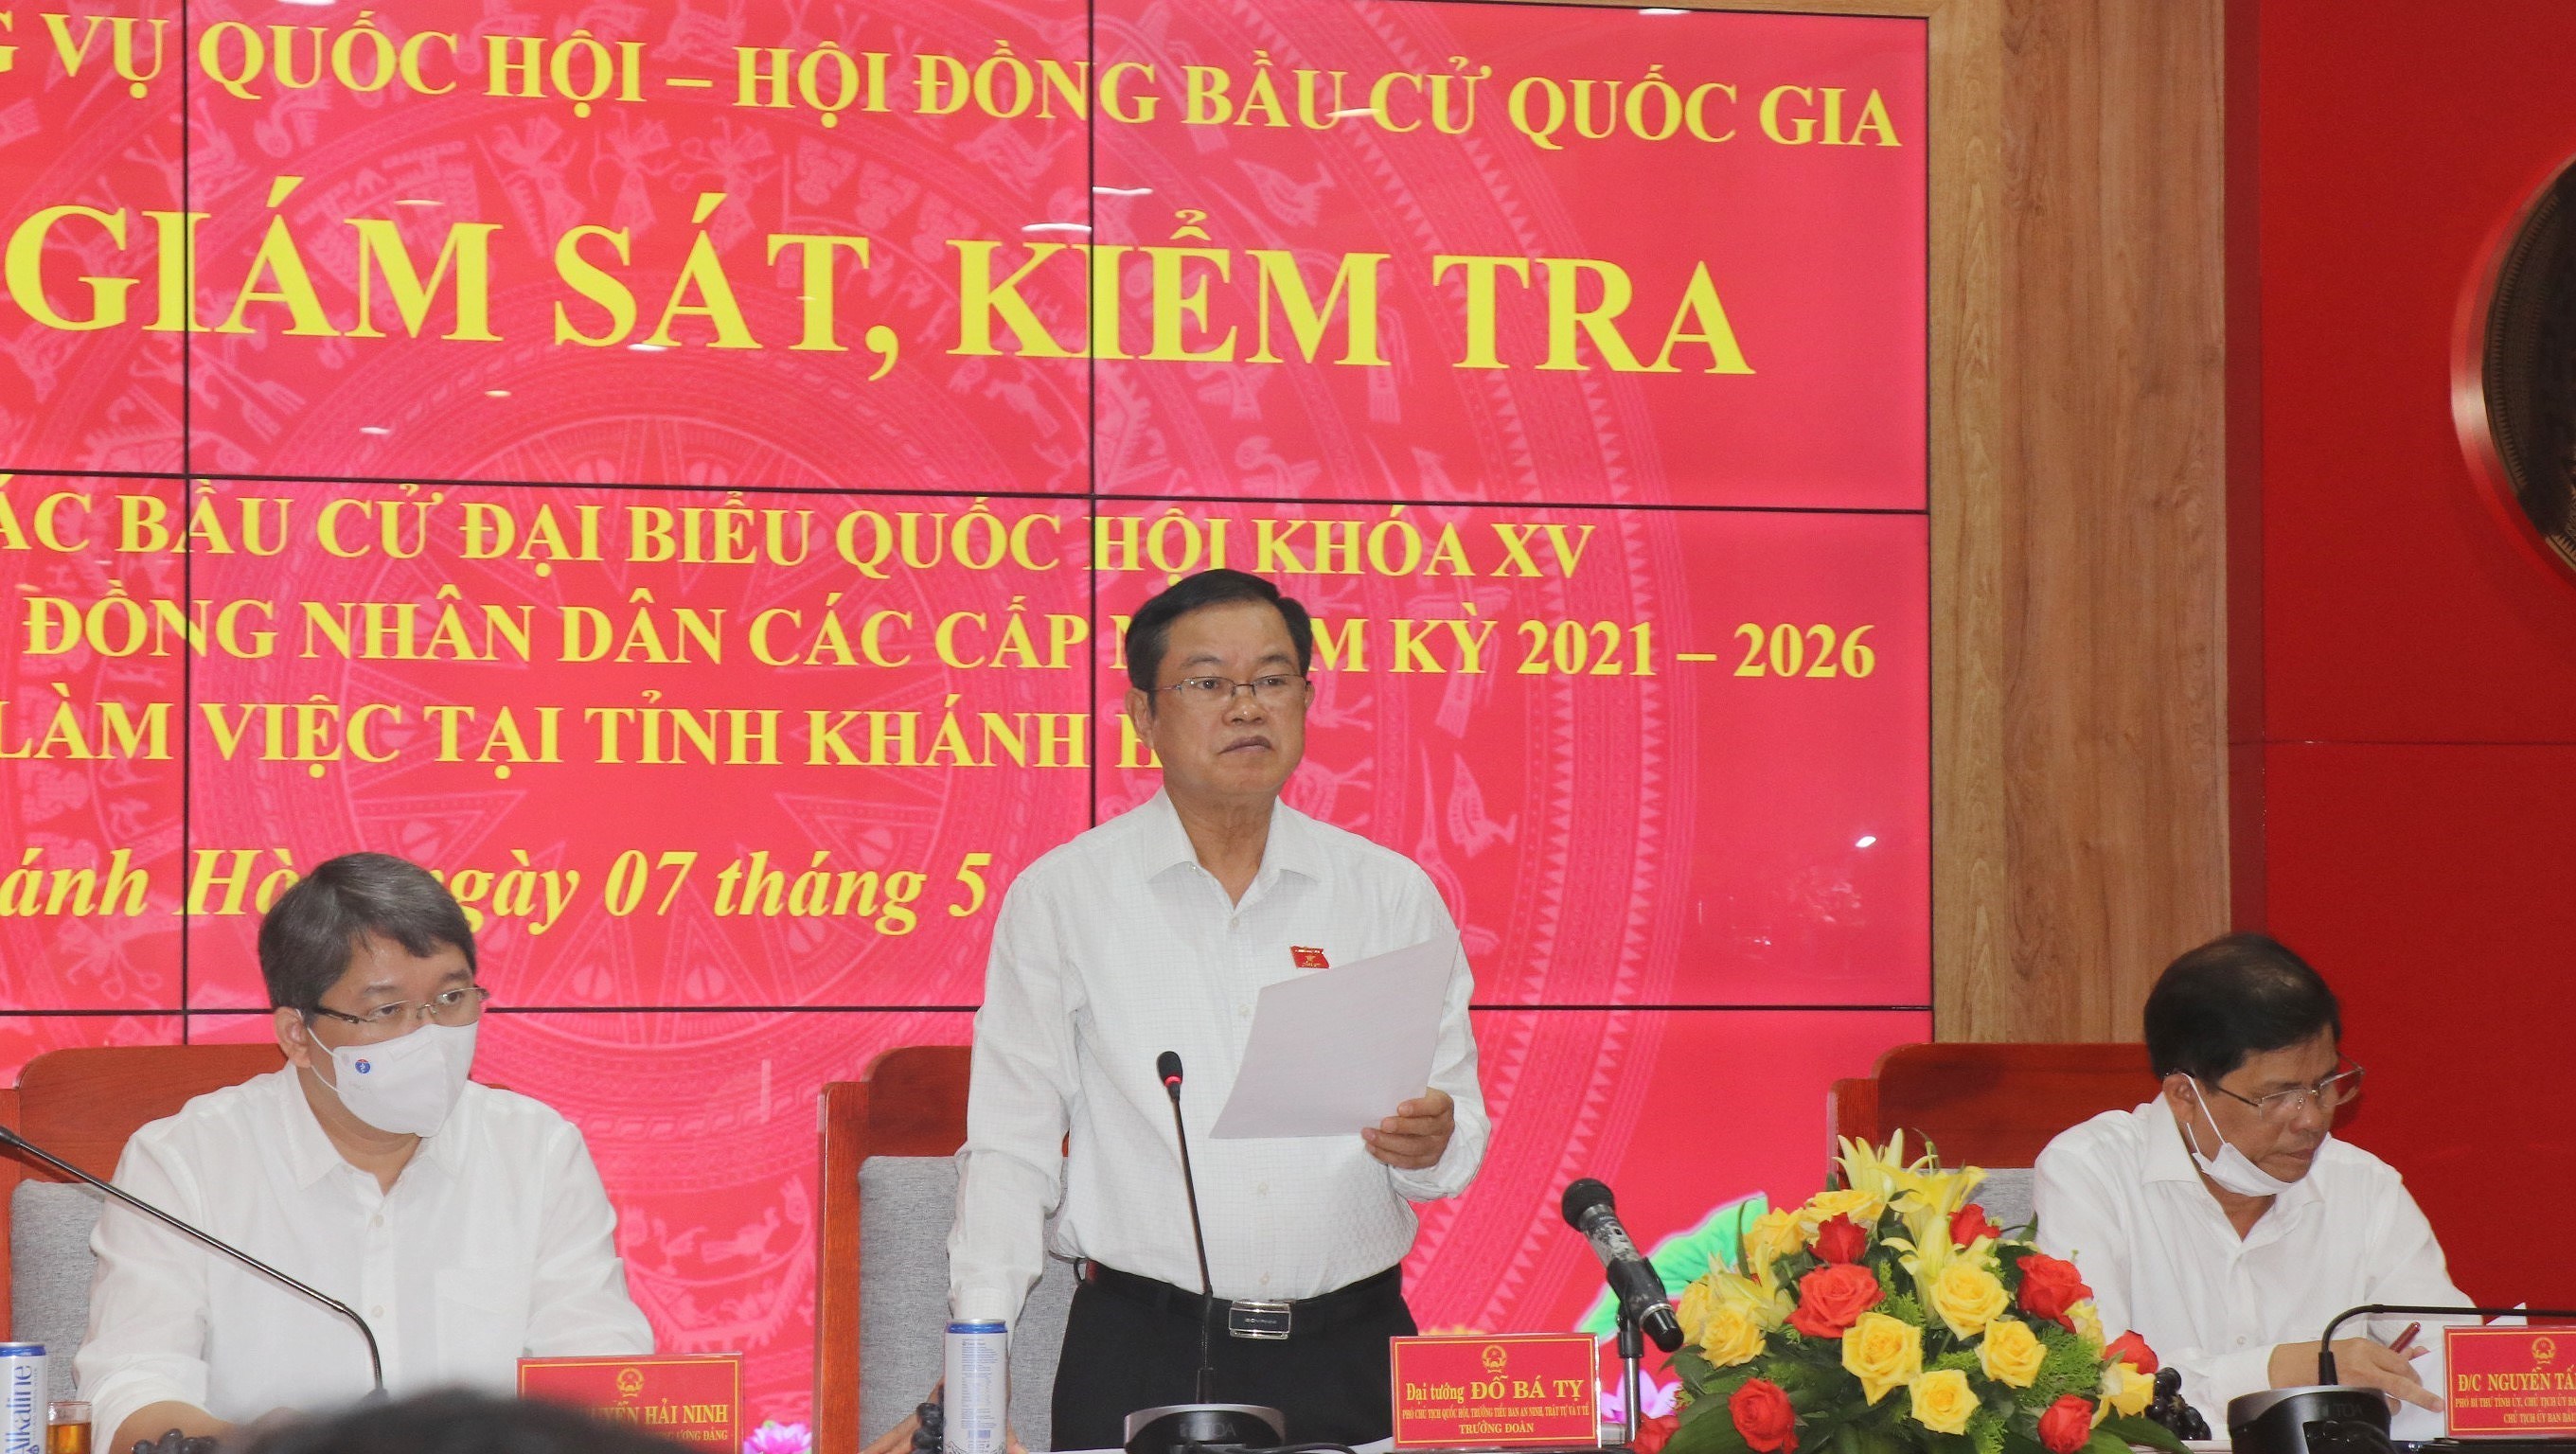 Early voting to be held in some polling stations of Truong Sa district hinh anh 2